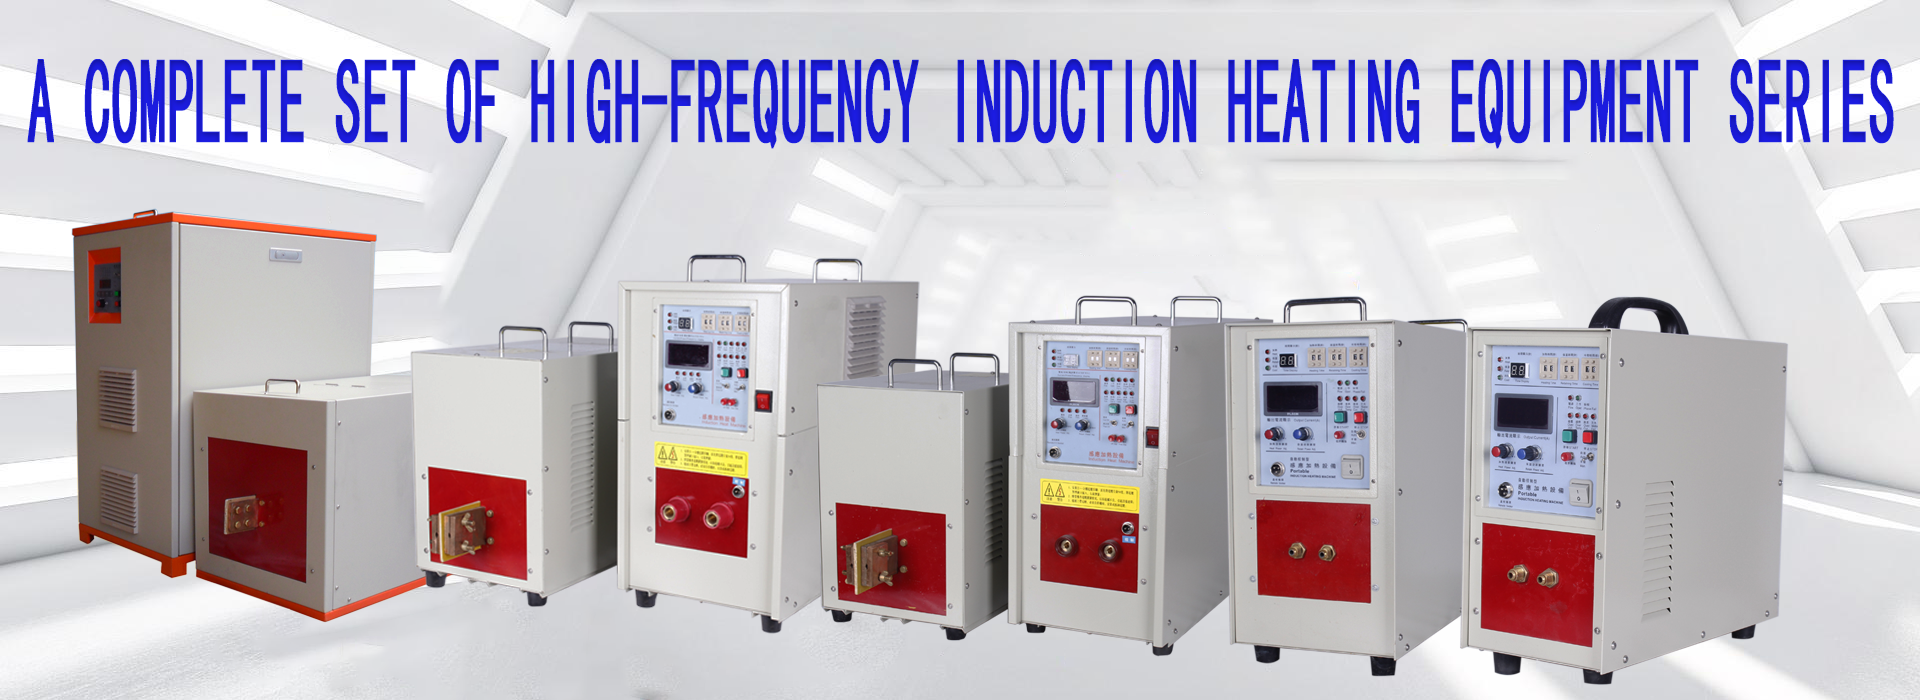 Full range of high frequency induction heating equipment